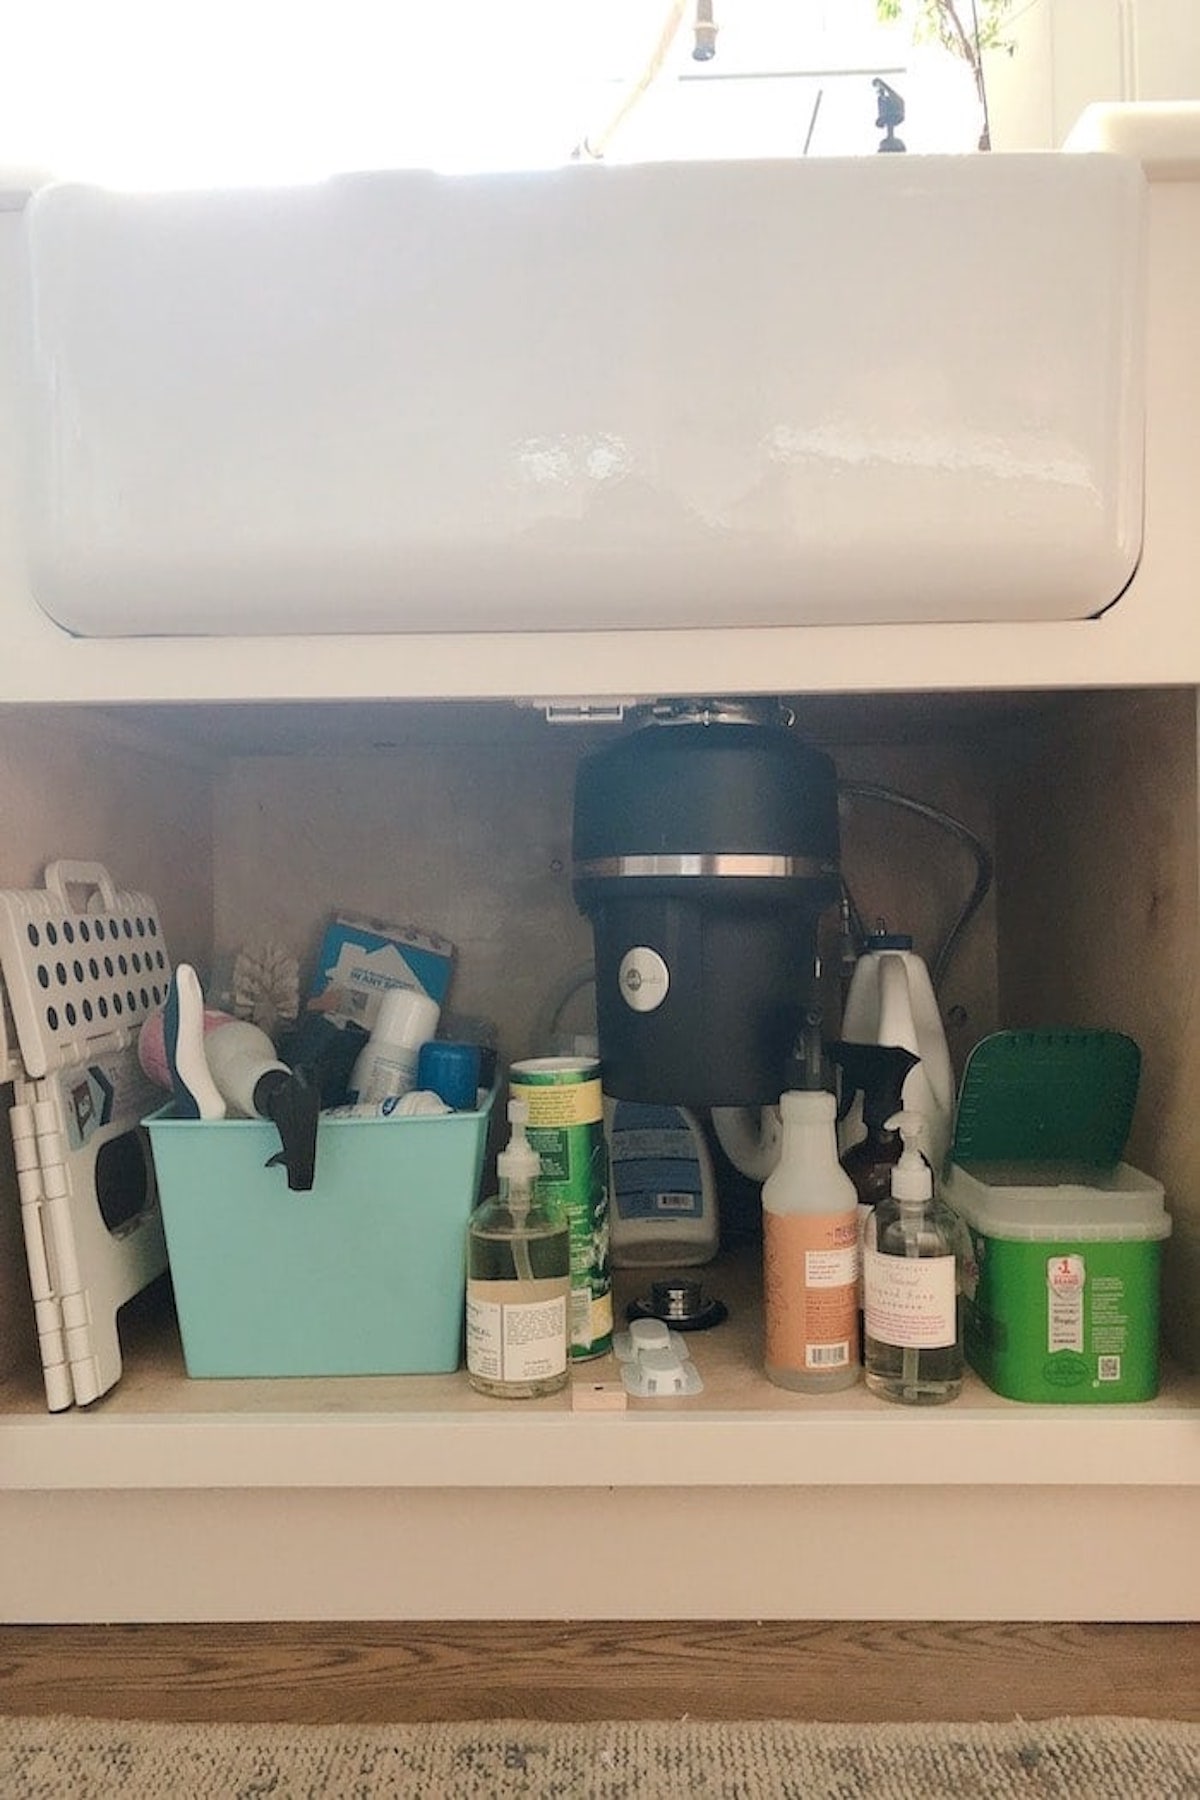 An assortment of cleaning supplies neatly placed under the kitchen sink for efficient under sink storage.